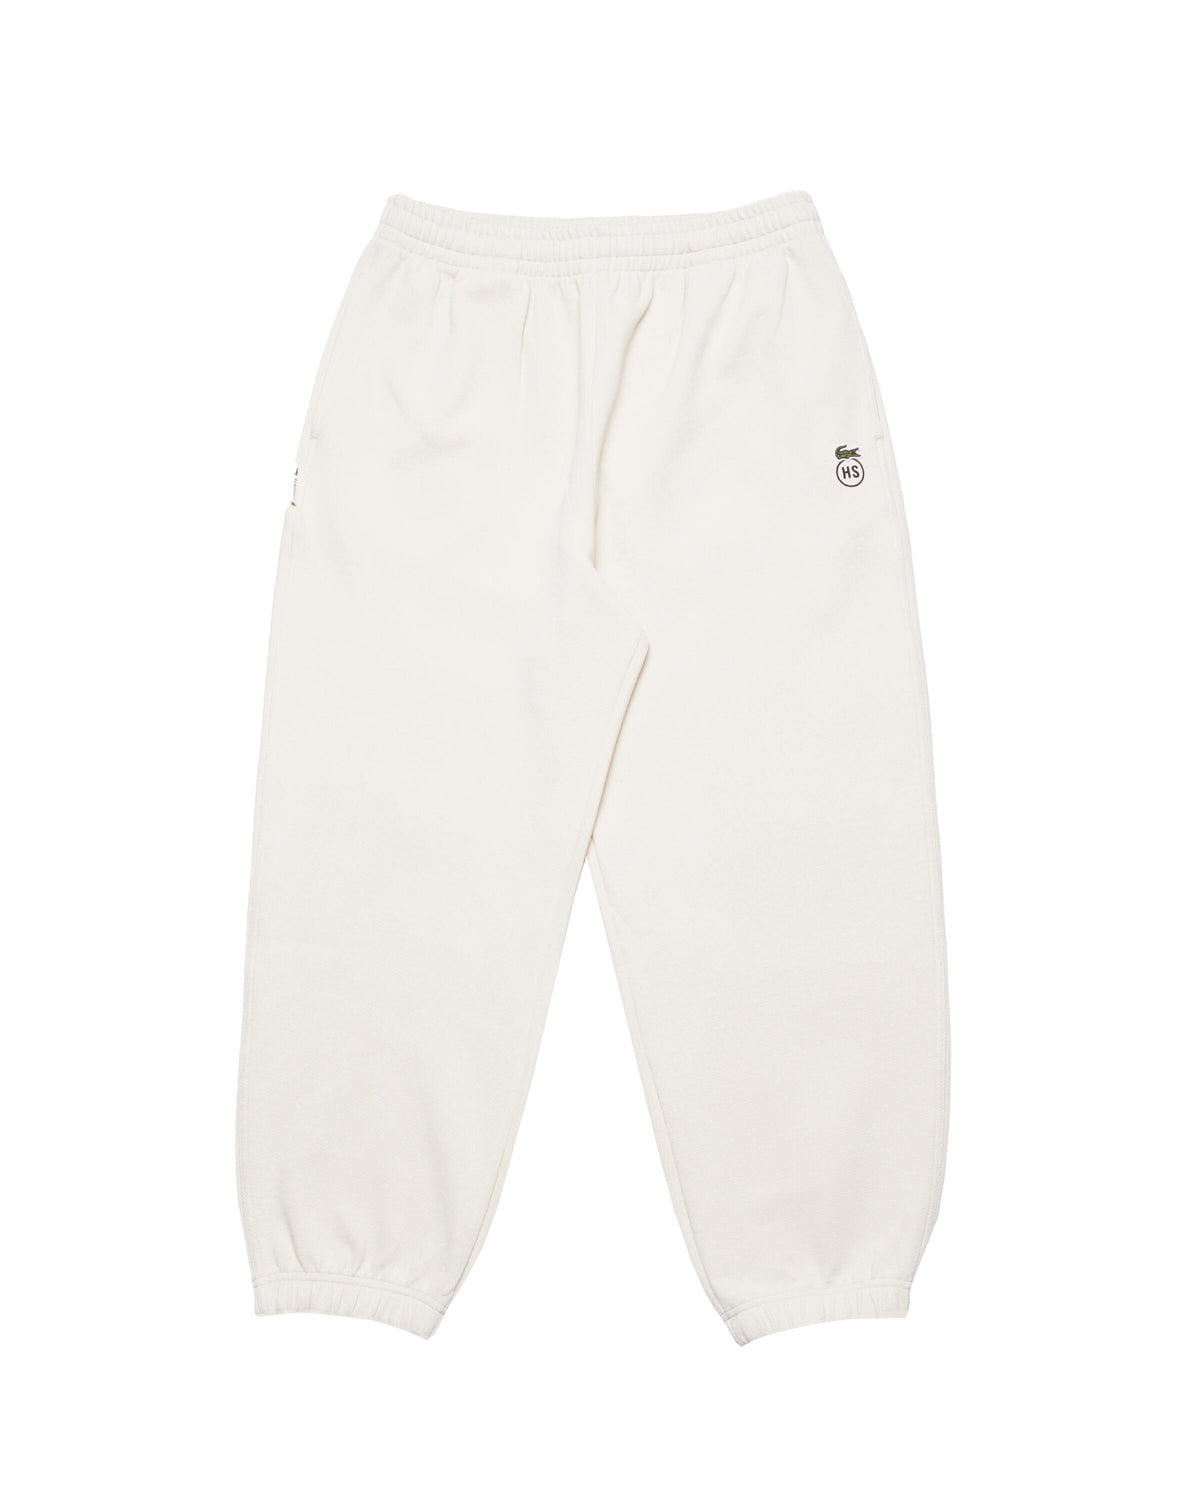 Lacoste x HIGHSNOBIETY Tracksuit Trousers